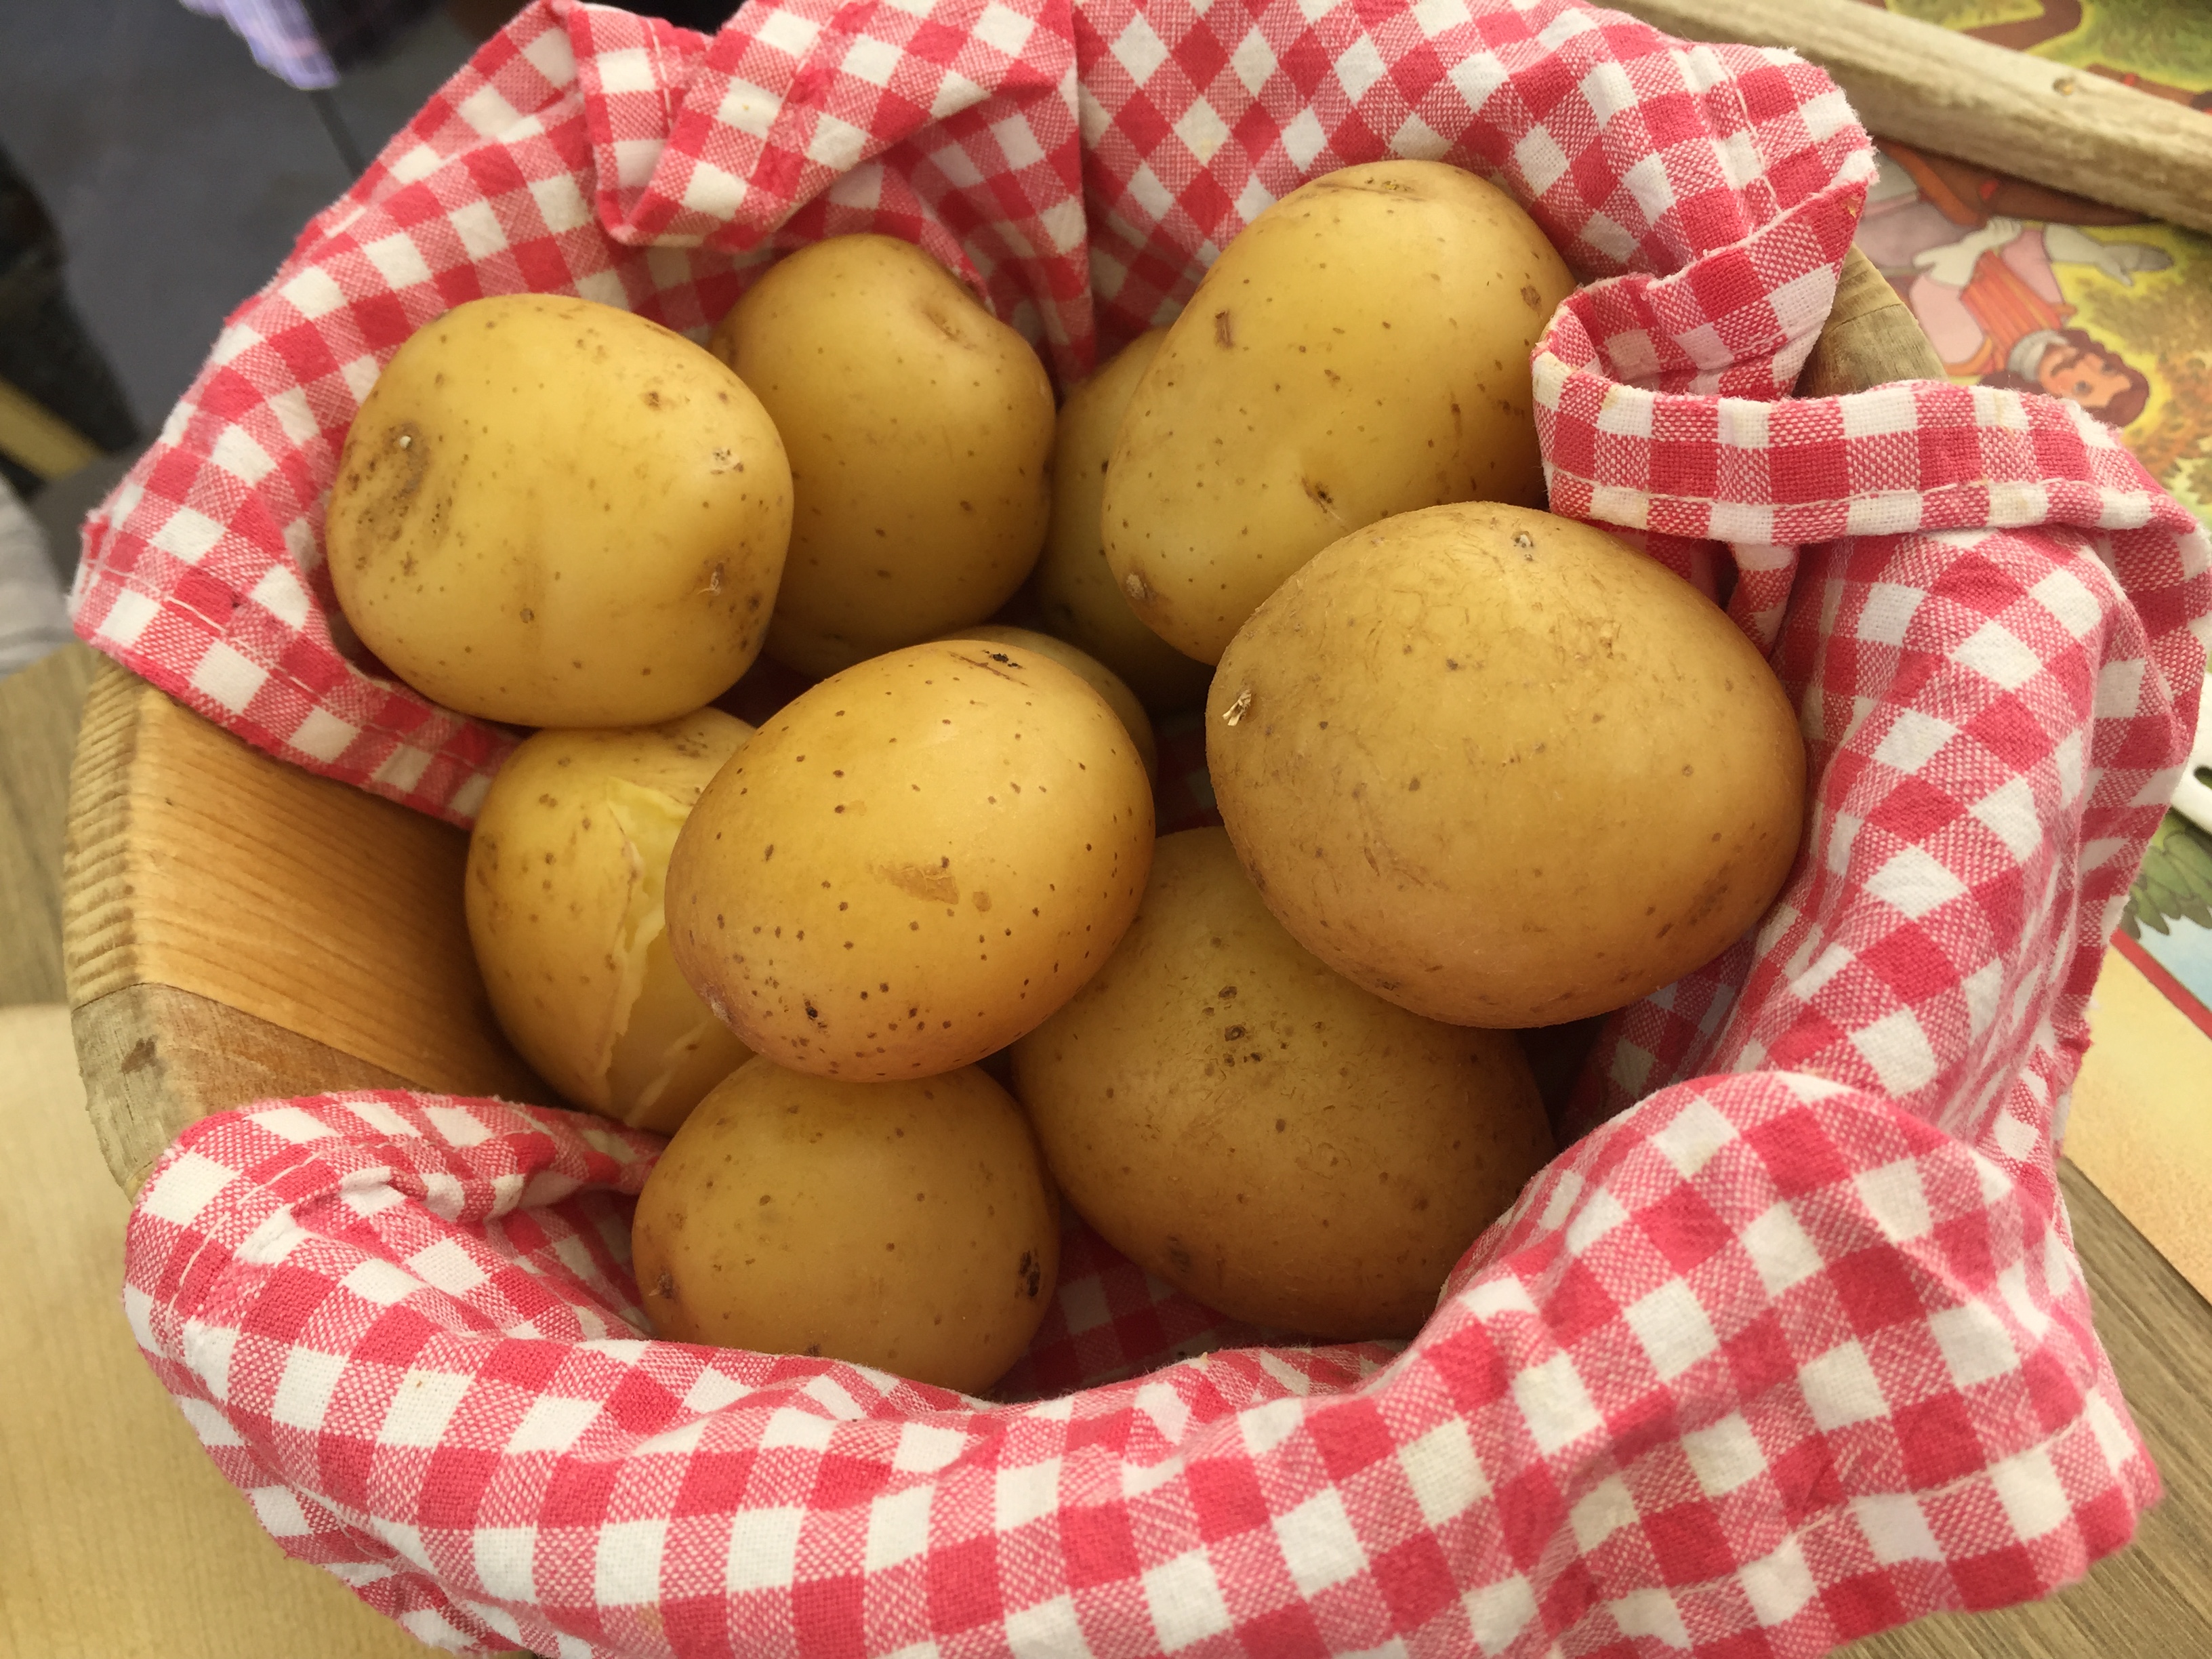 Delicious potatoes for the raclette